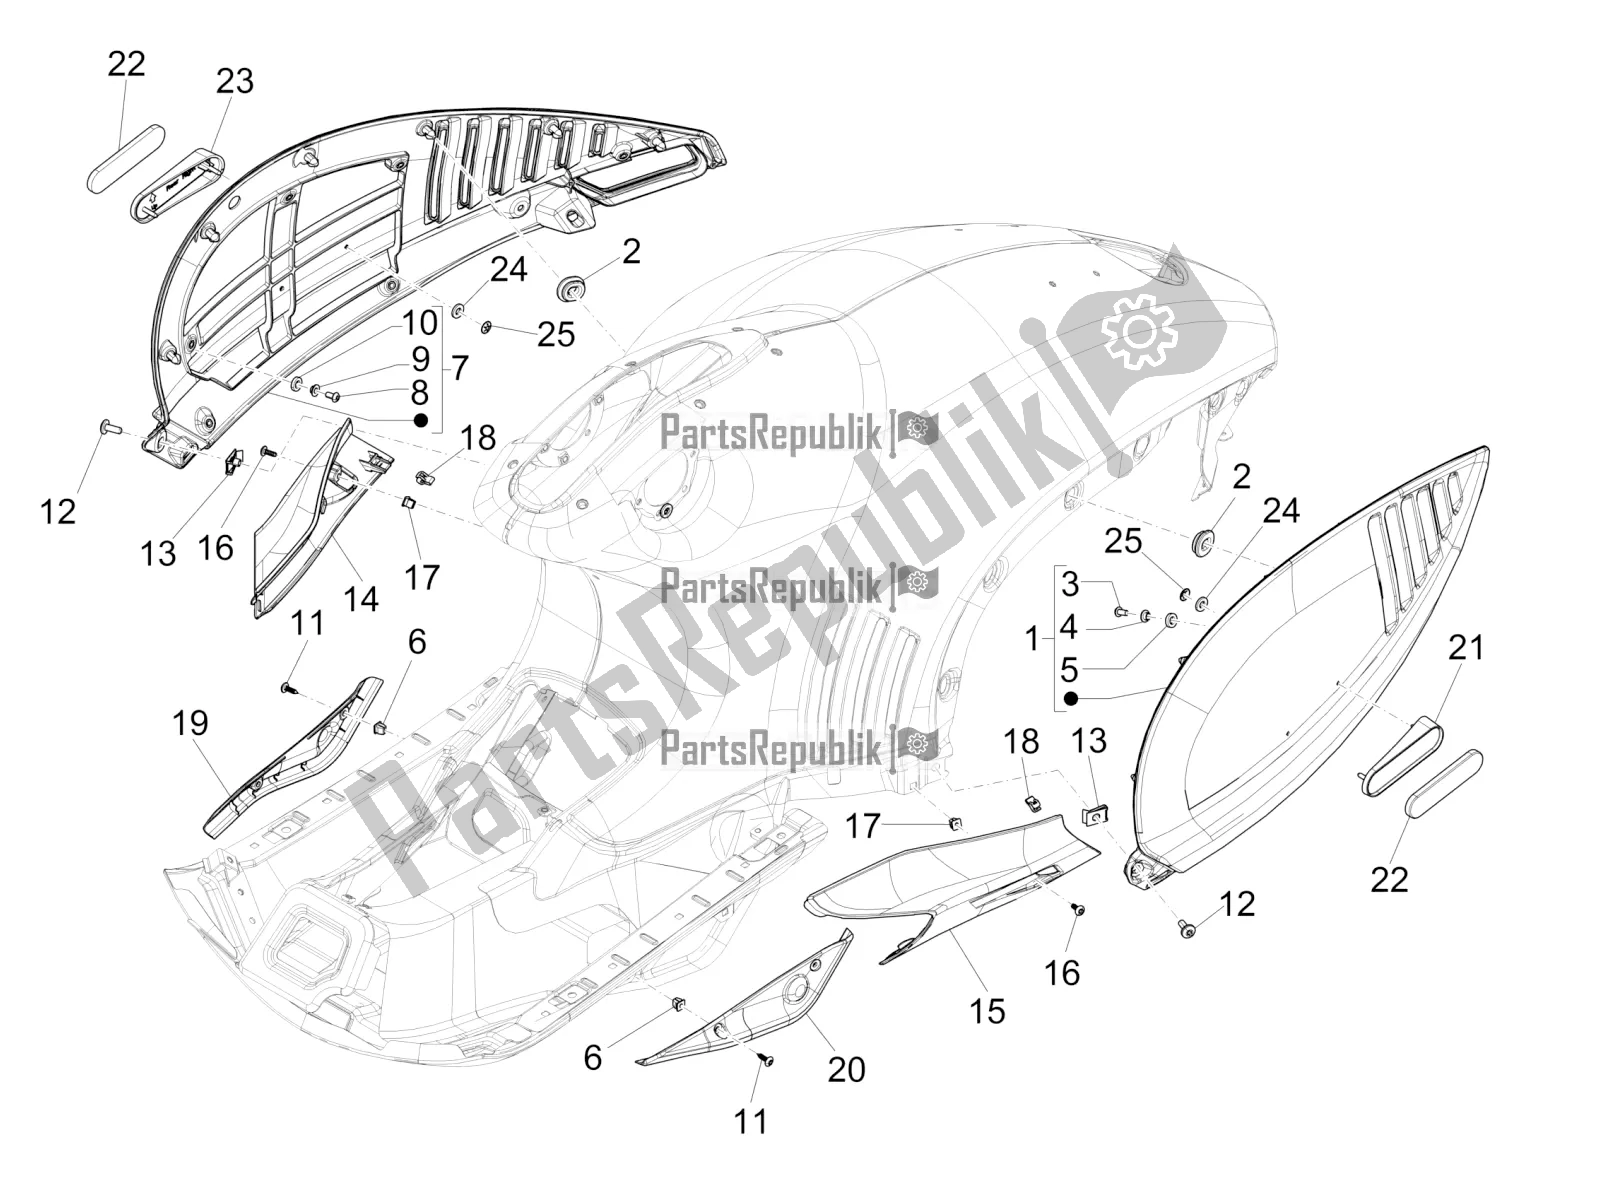 All parts for the Side Cover - Spoiler of the Vespa 946 150 ABS CD Apac 2022